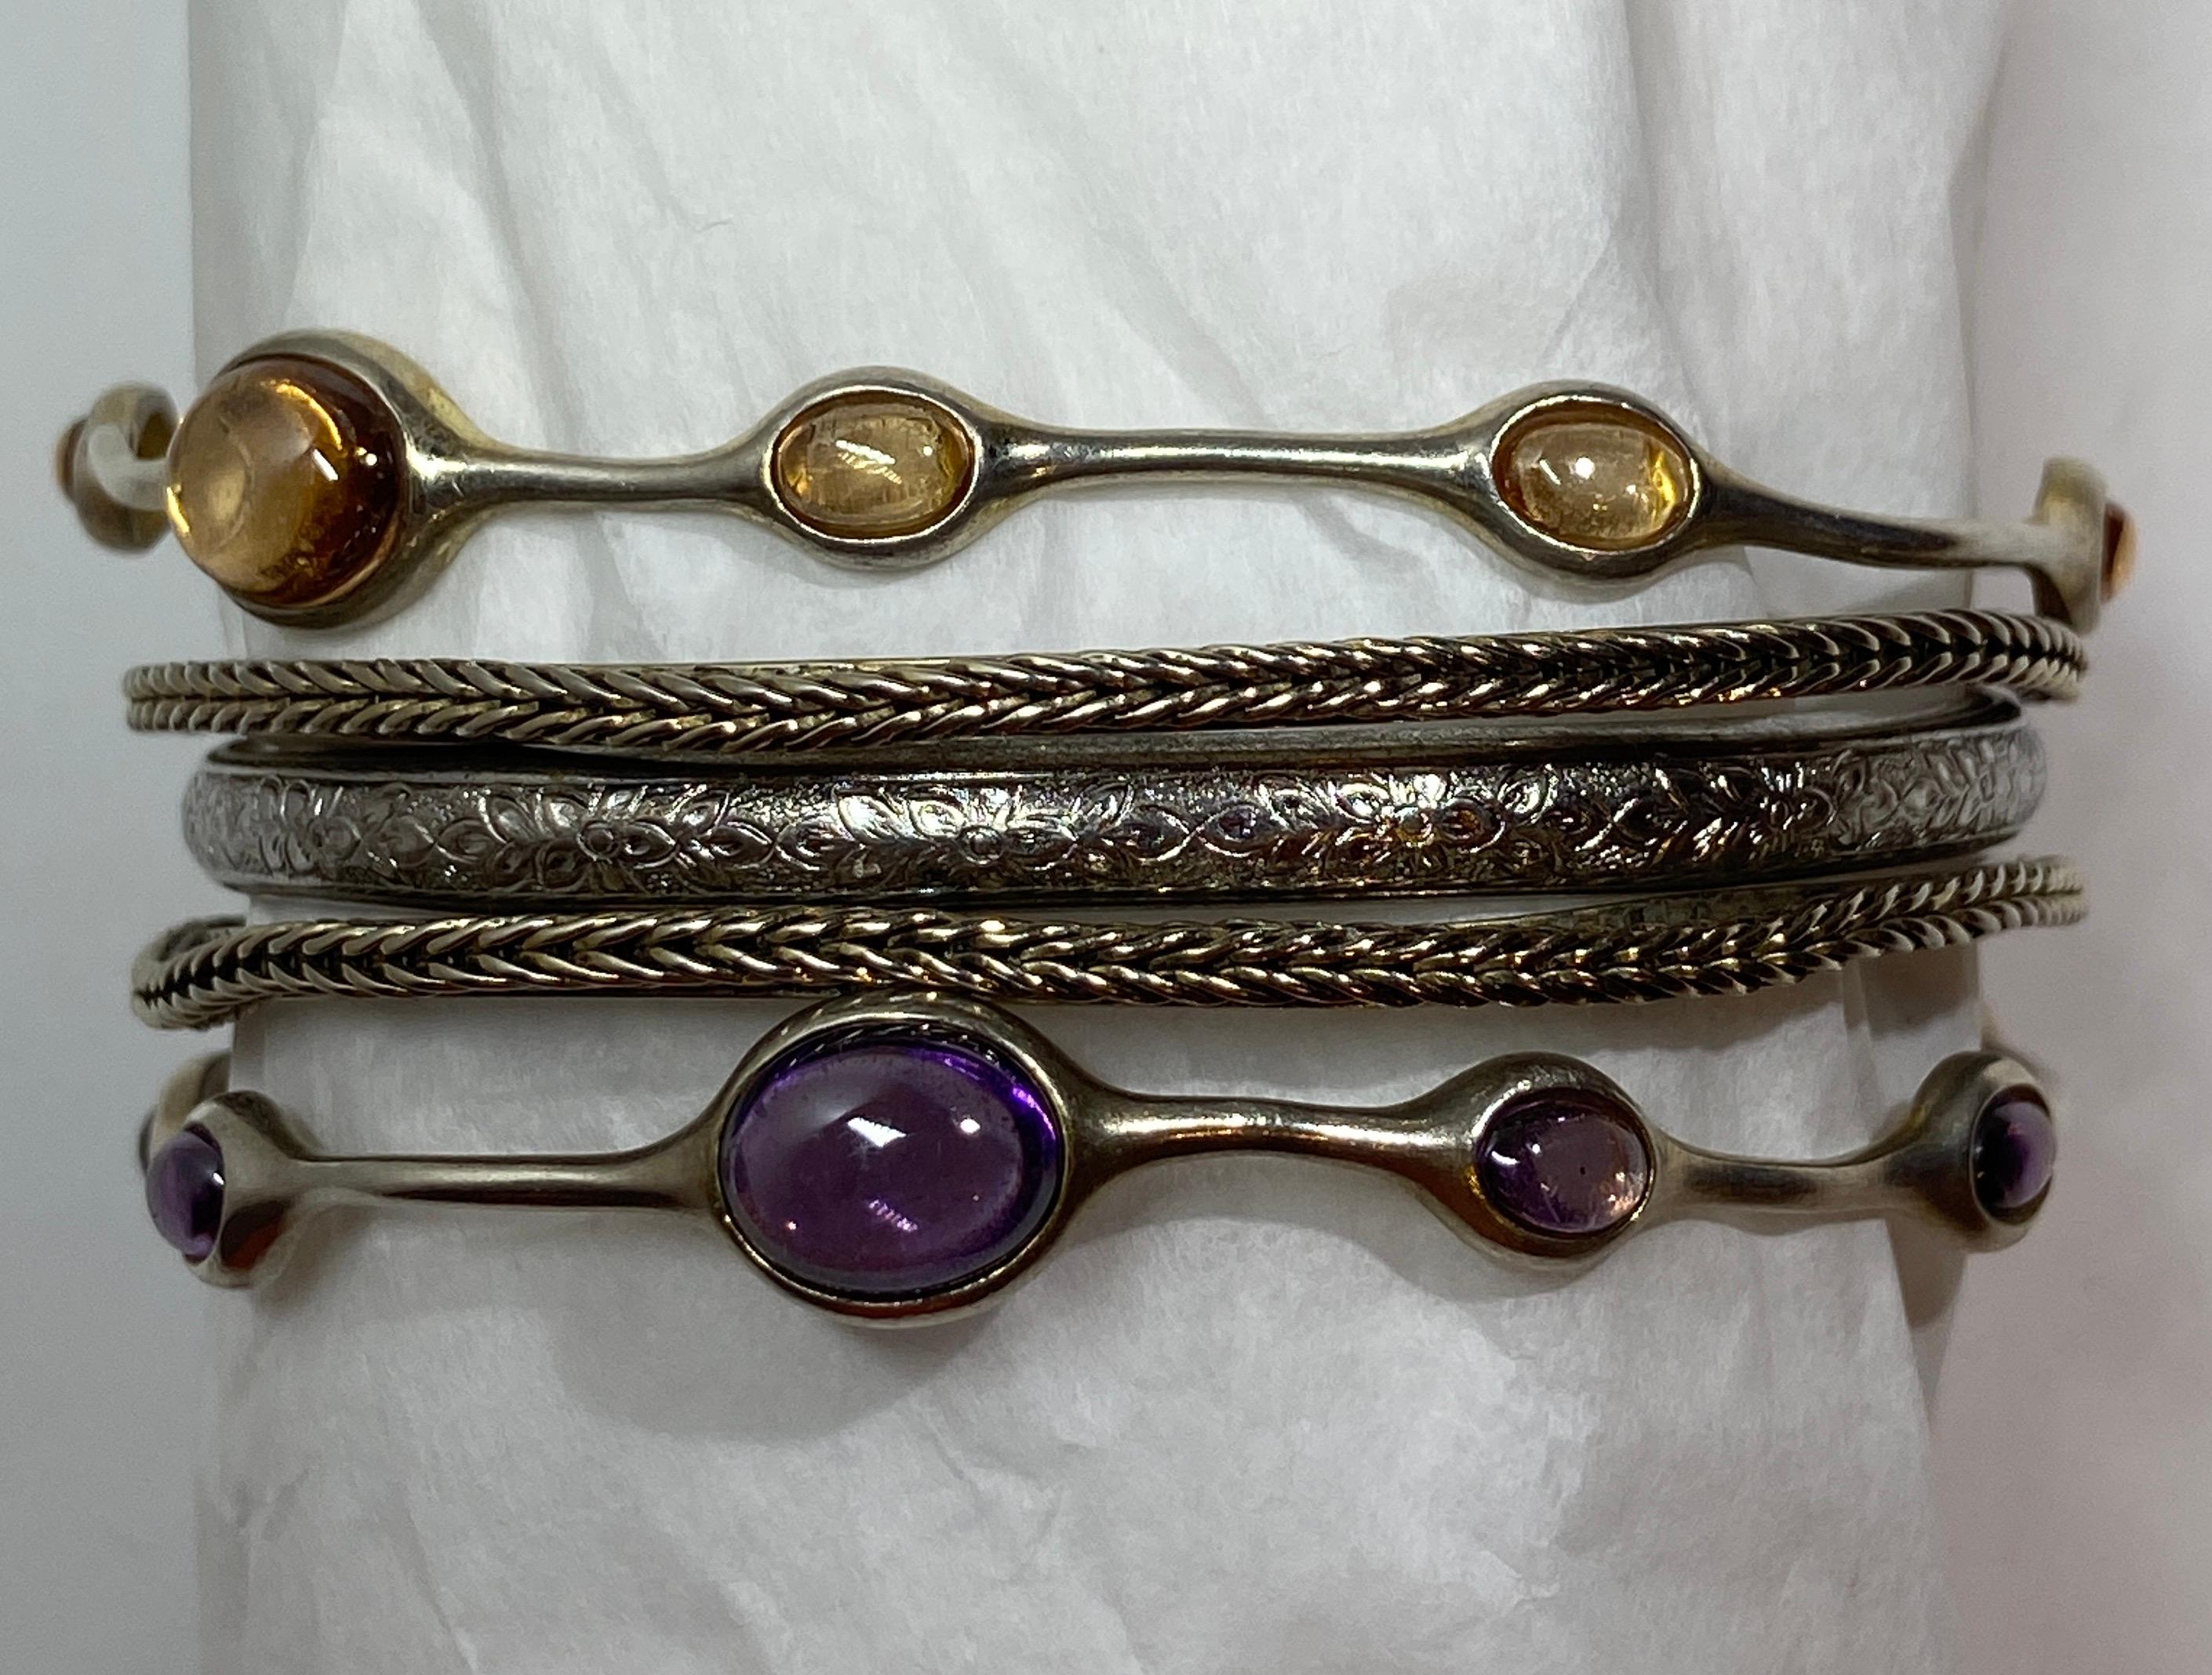 This wonderful collection of five assortment of sterling silver bracelet consist of one set with Amethyst stones with maker's mark along the interior 'FAS'. the partner bracelet is set with Citrine stones with maker's mark as well. The other pair of